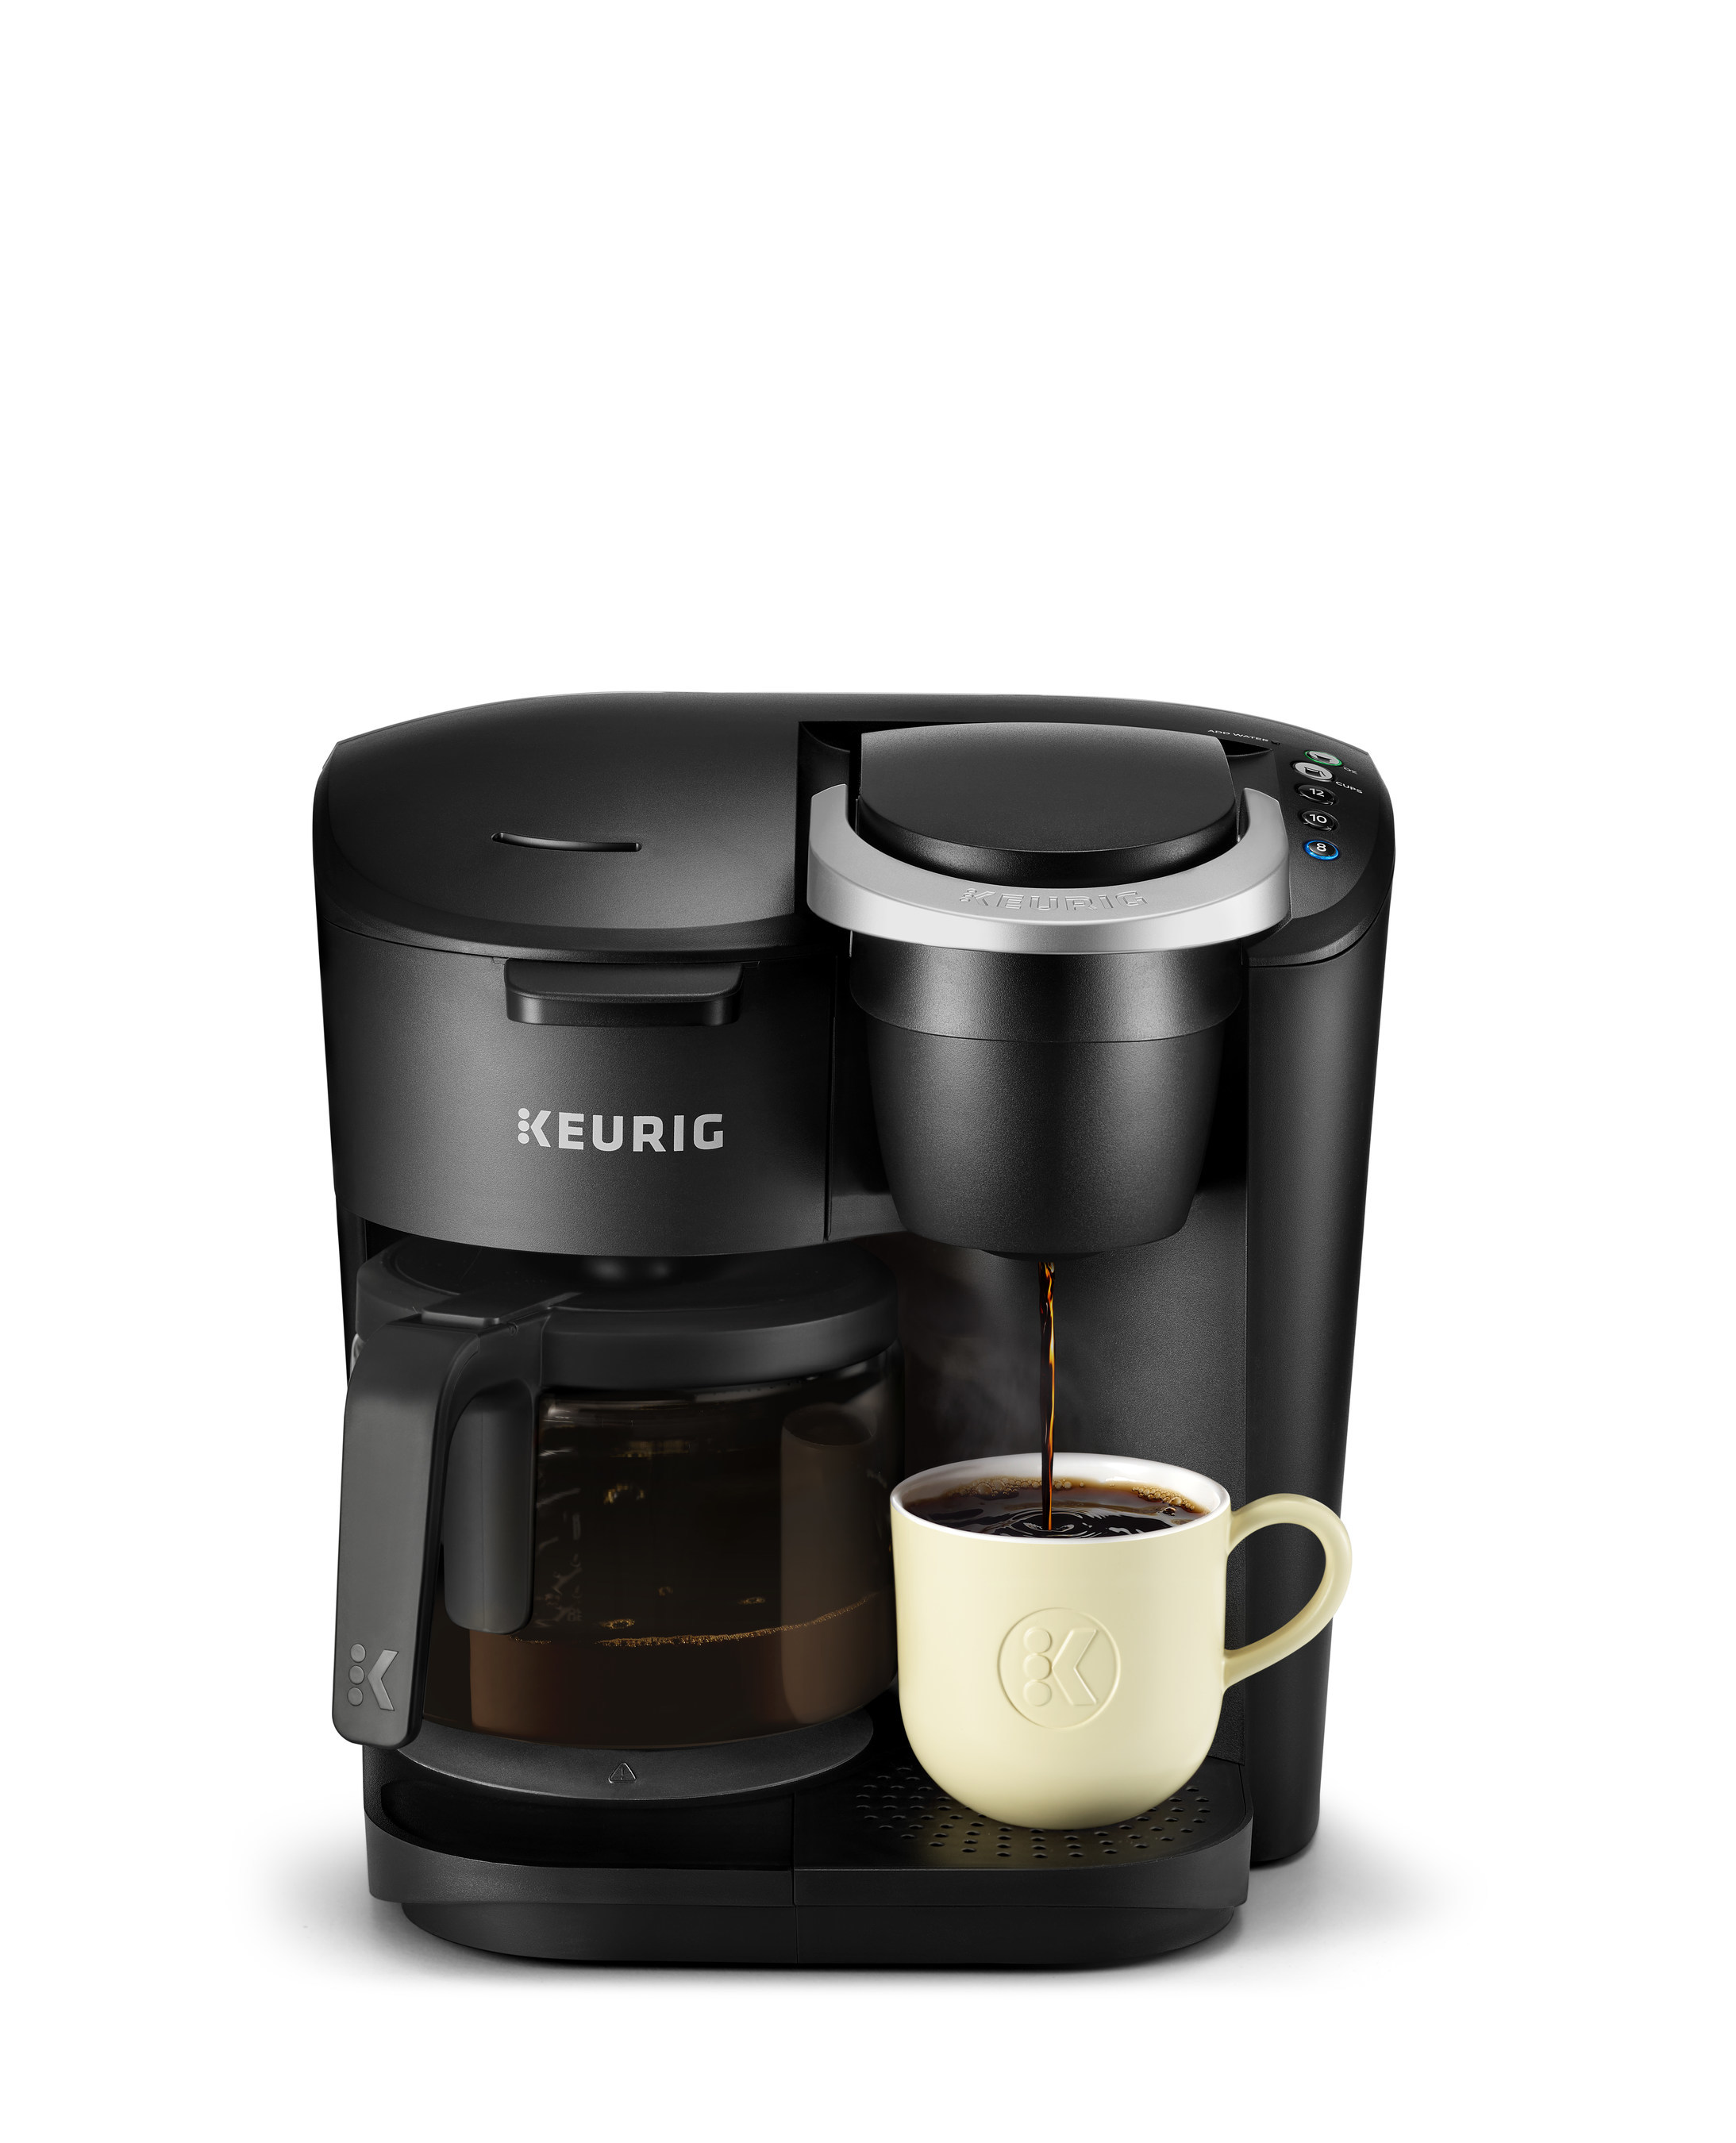 Keurig Dr Pepper Launches Latest Brewer Innovation With The K Duo Portfolio